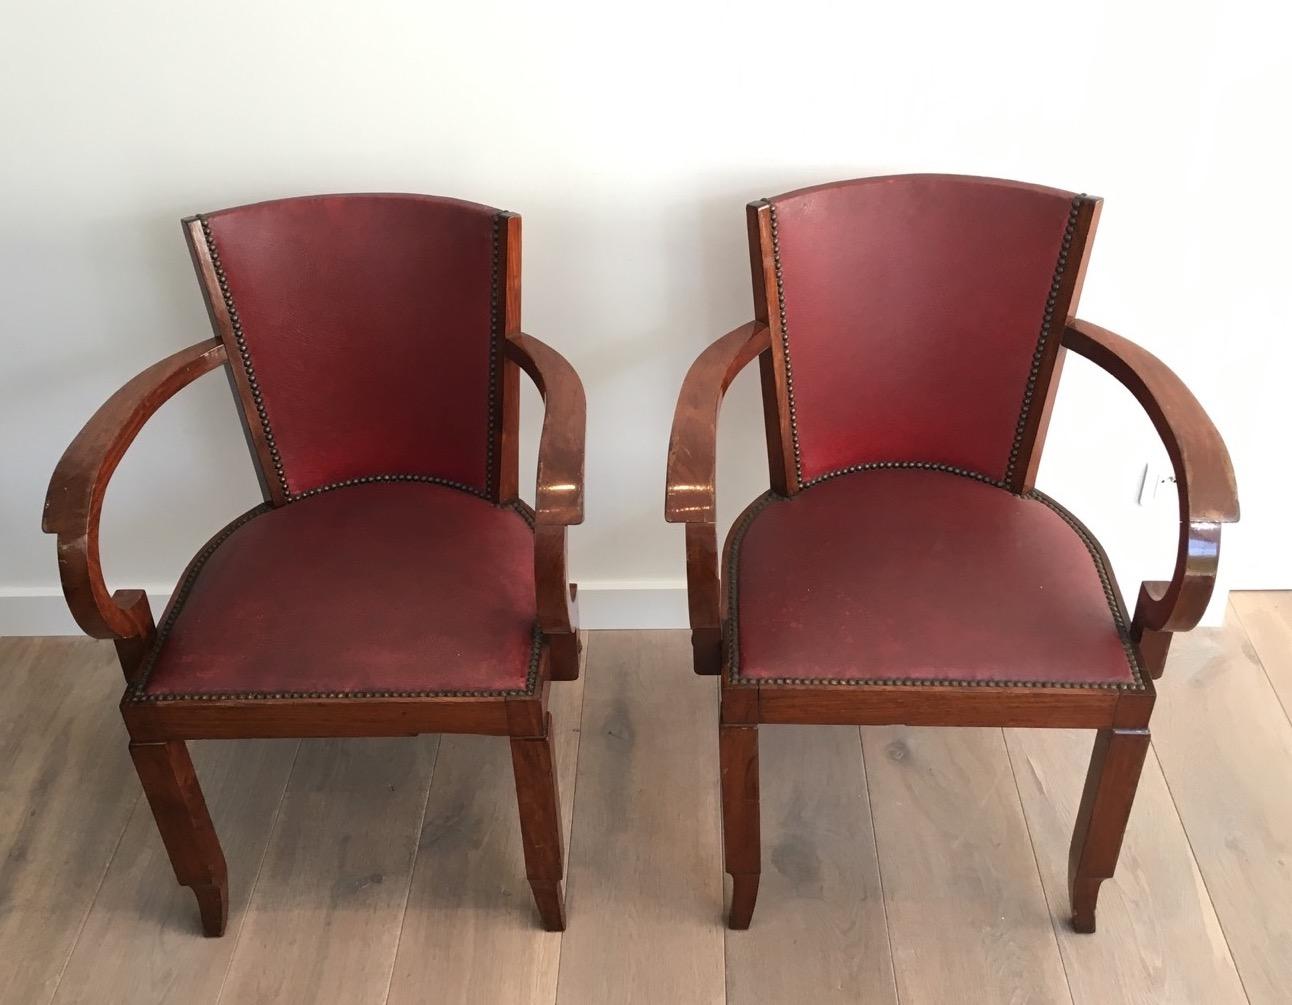 Rare Set of 8 Mahogany and Faux-Leather Art Deco Armchairs, French, circa 1930 For Sale 12